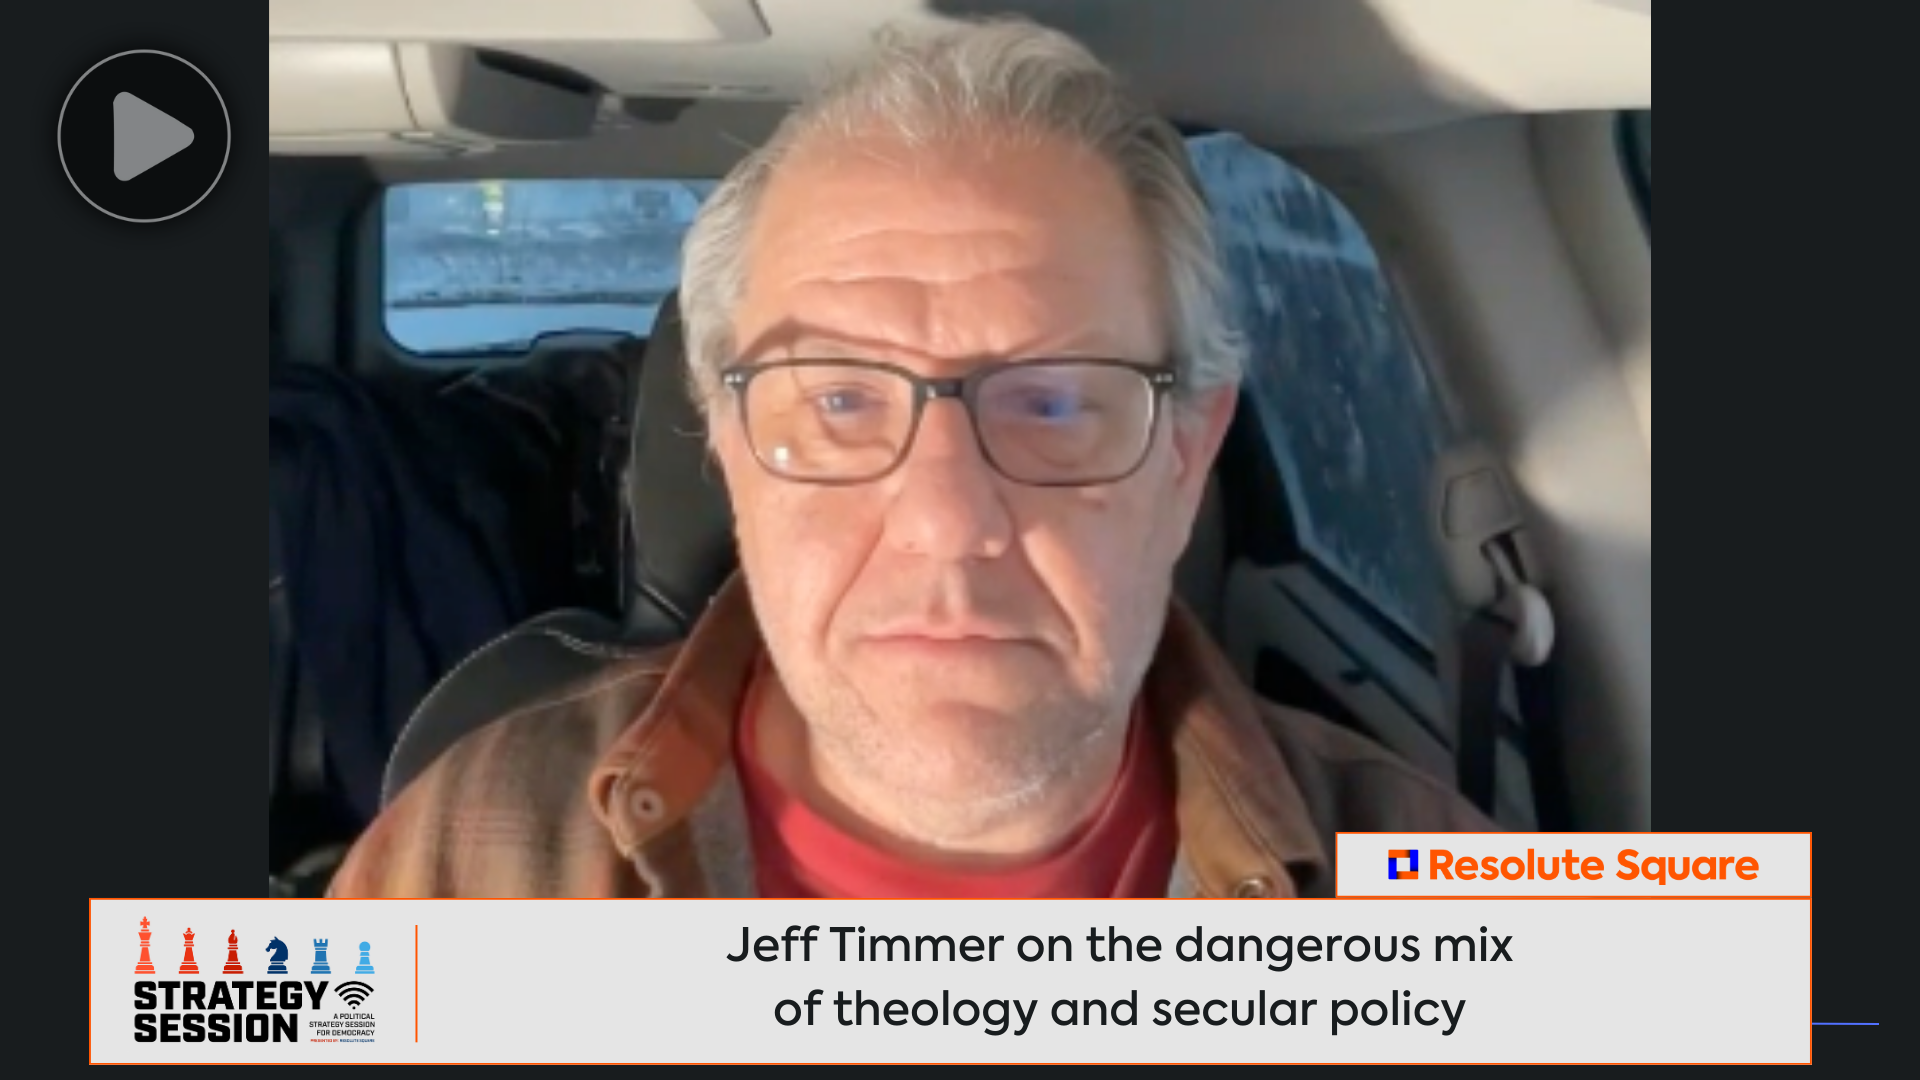 Jeff Timmer: The Dangerous Mix of Theology and Secular Policy